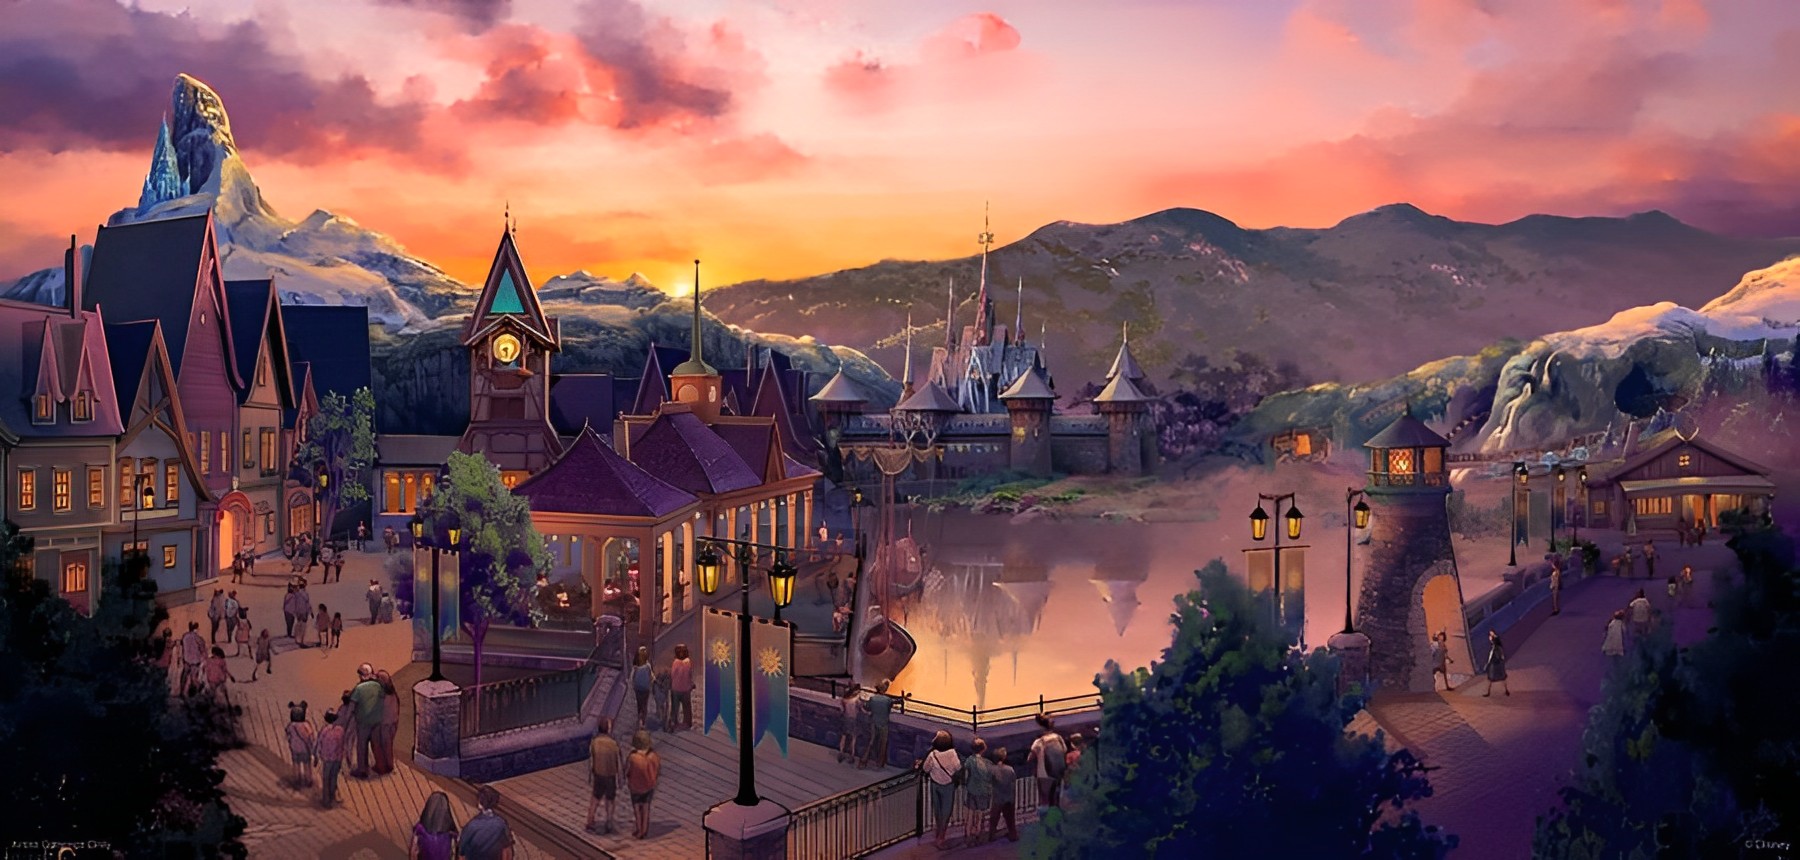 A rendering of the World of Frozen, which will open at Hong Kong Disneyland in November 2023.